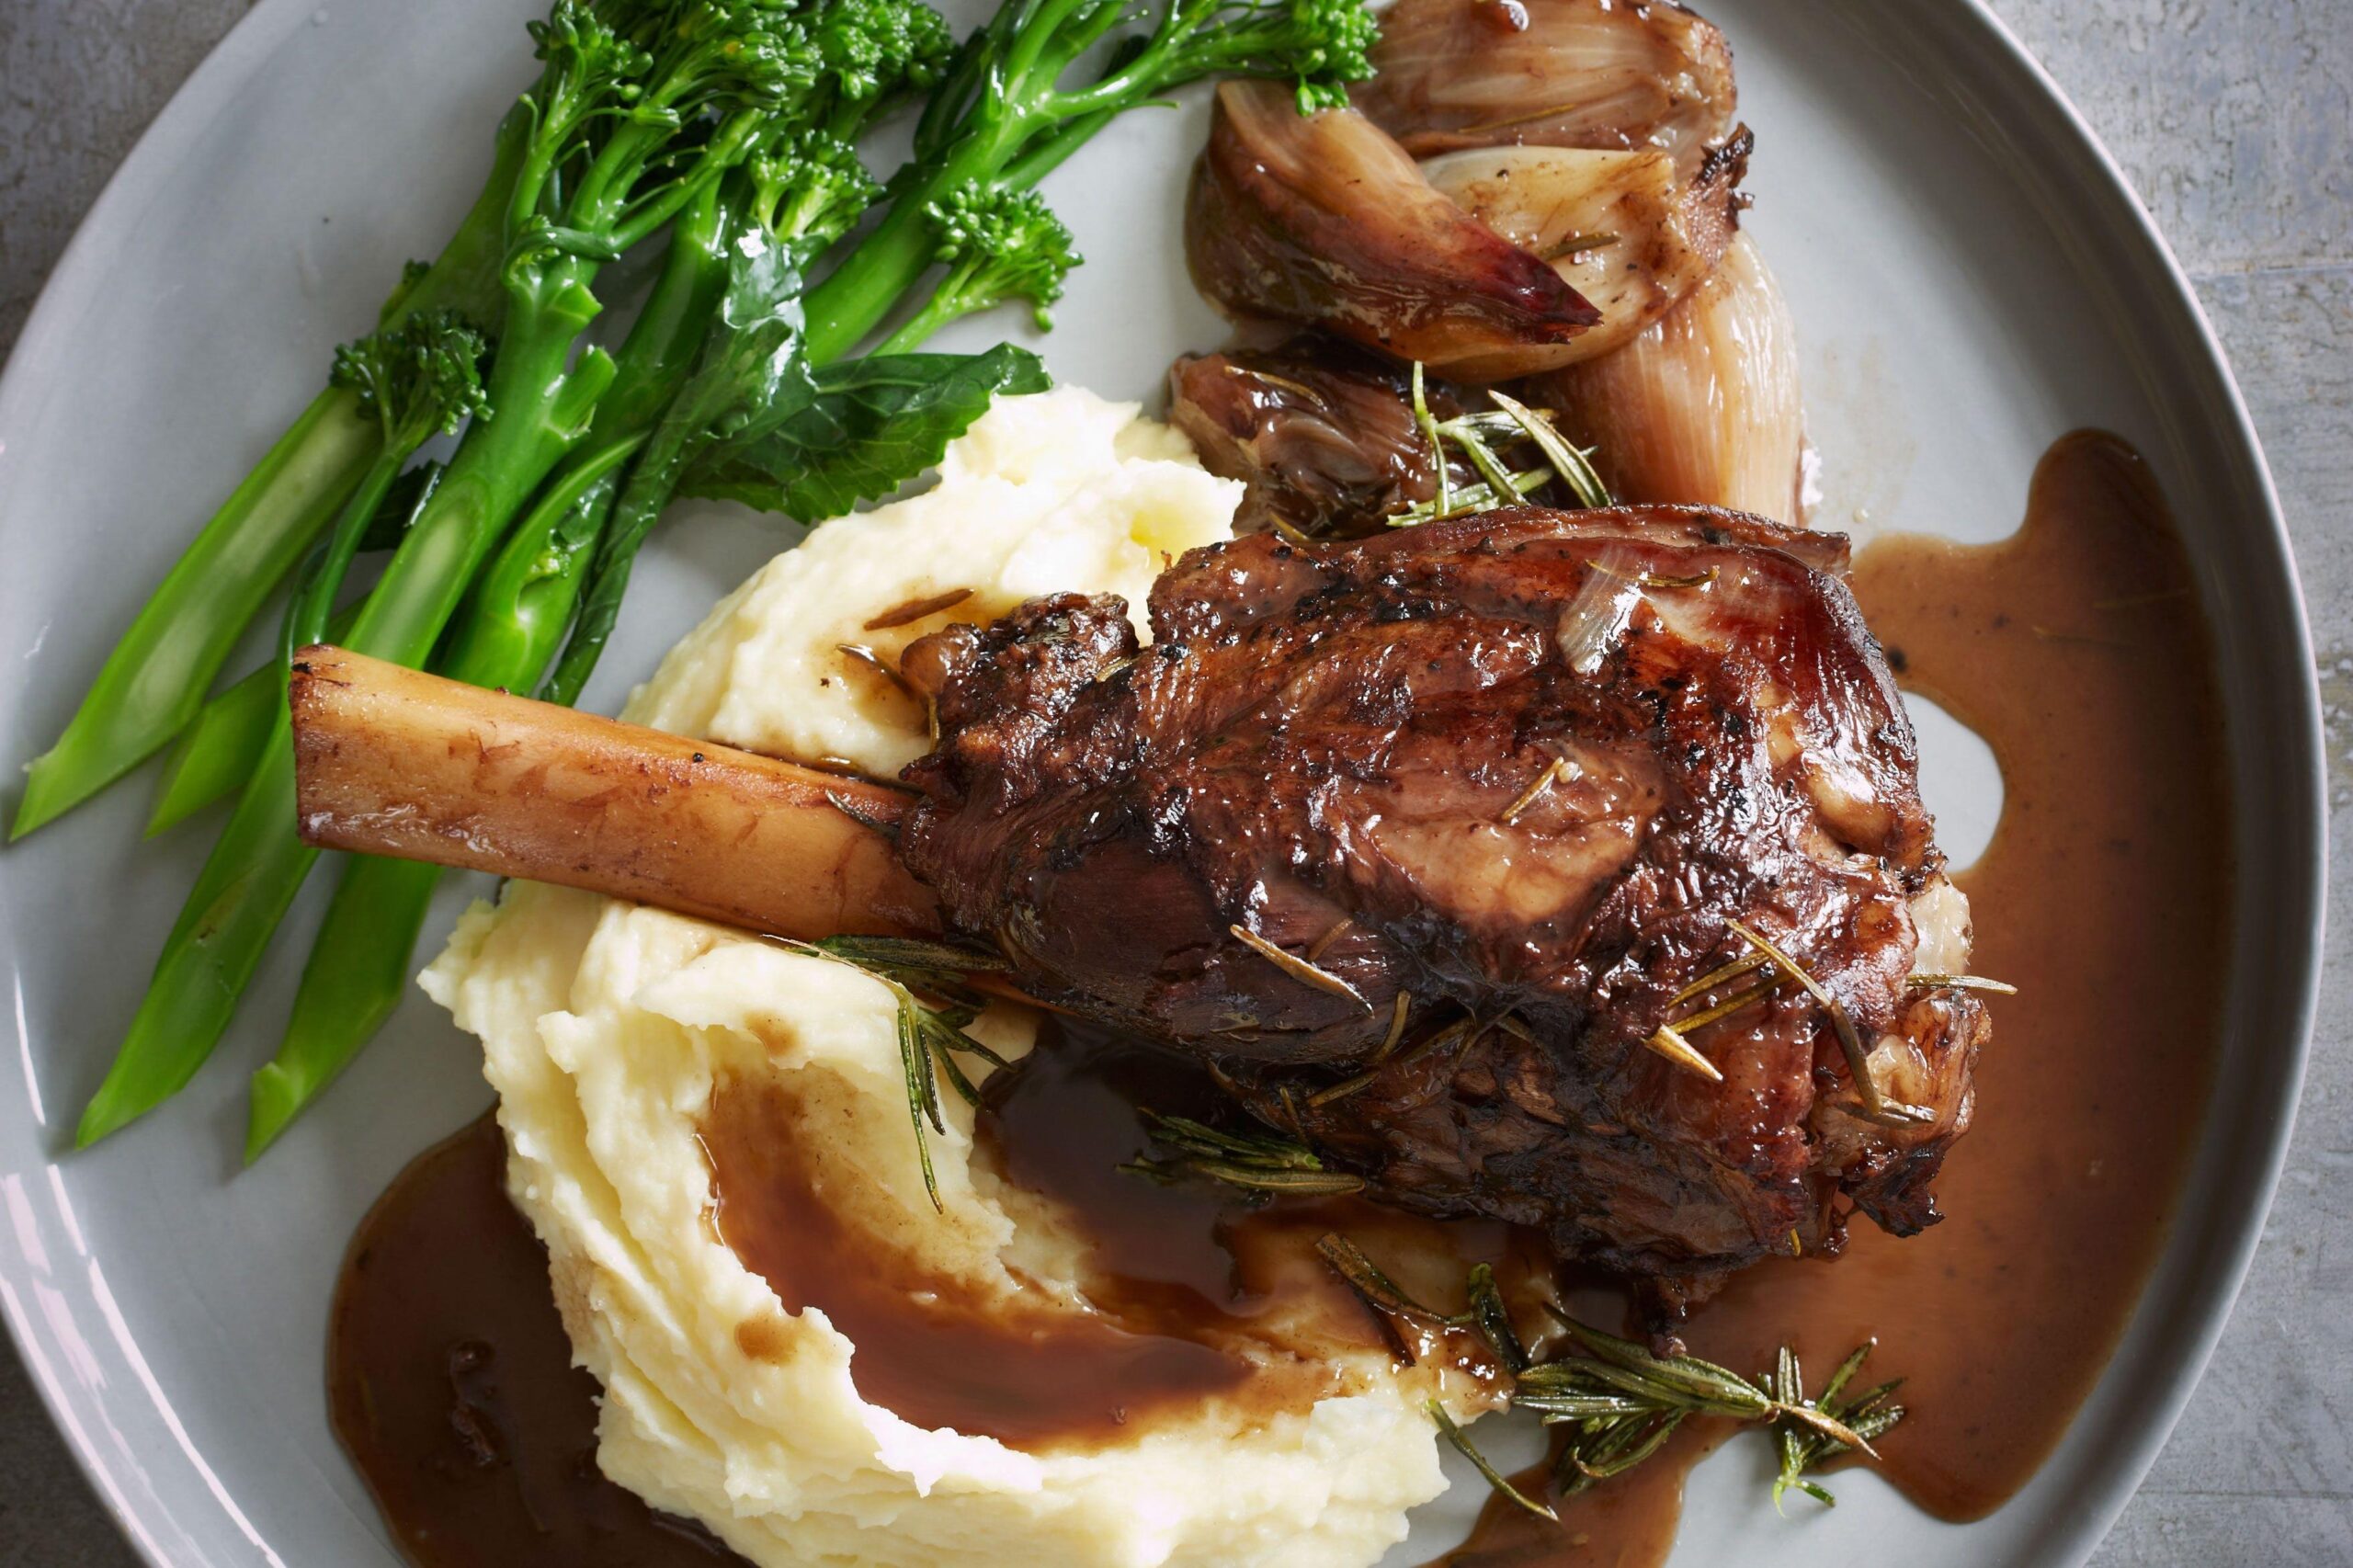  The tenderness of the lamb shank will melt in your mouth with every bite.